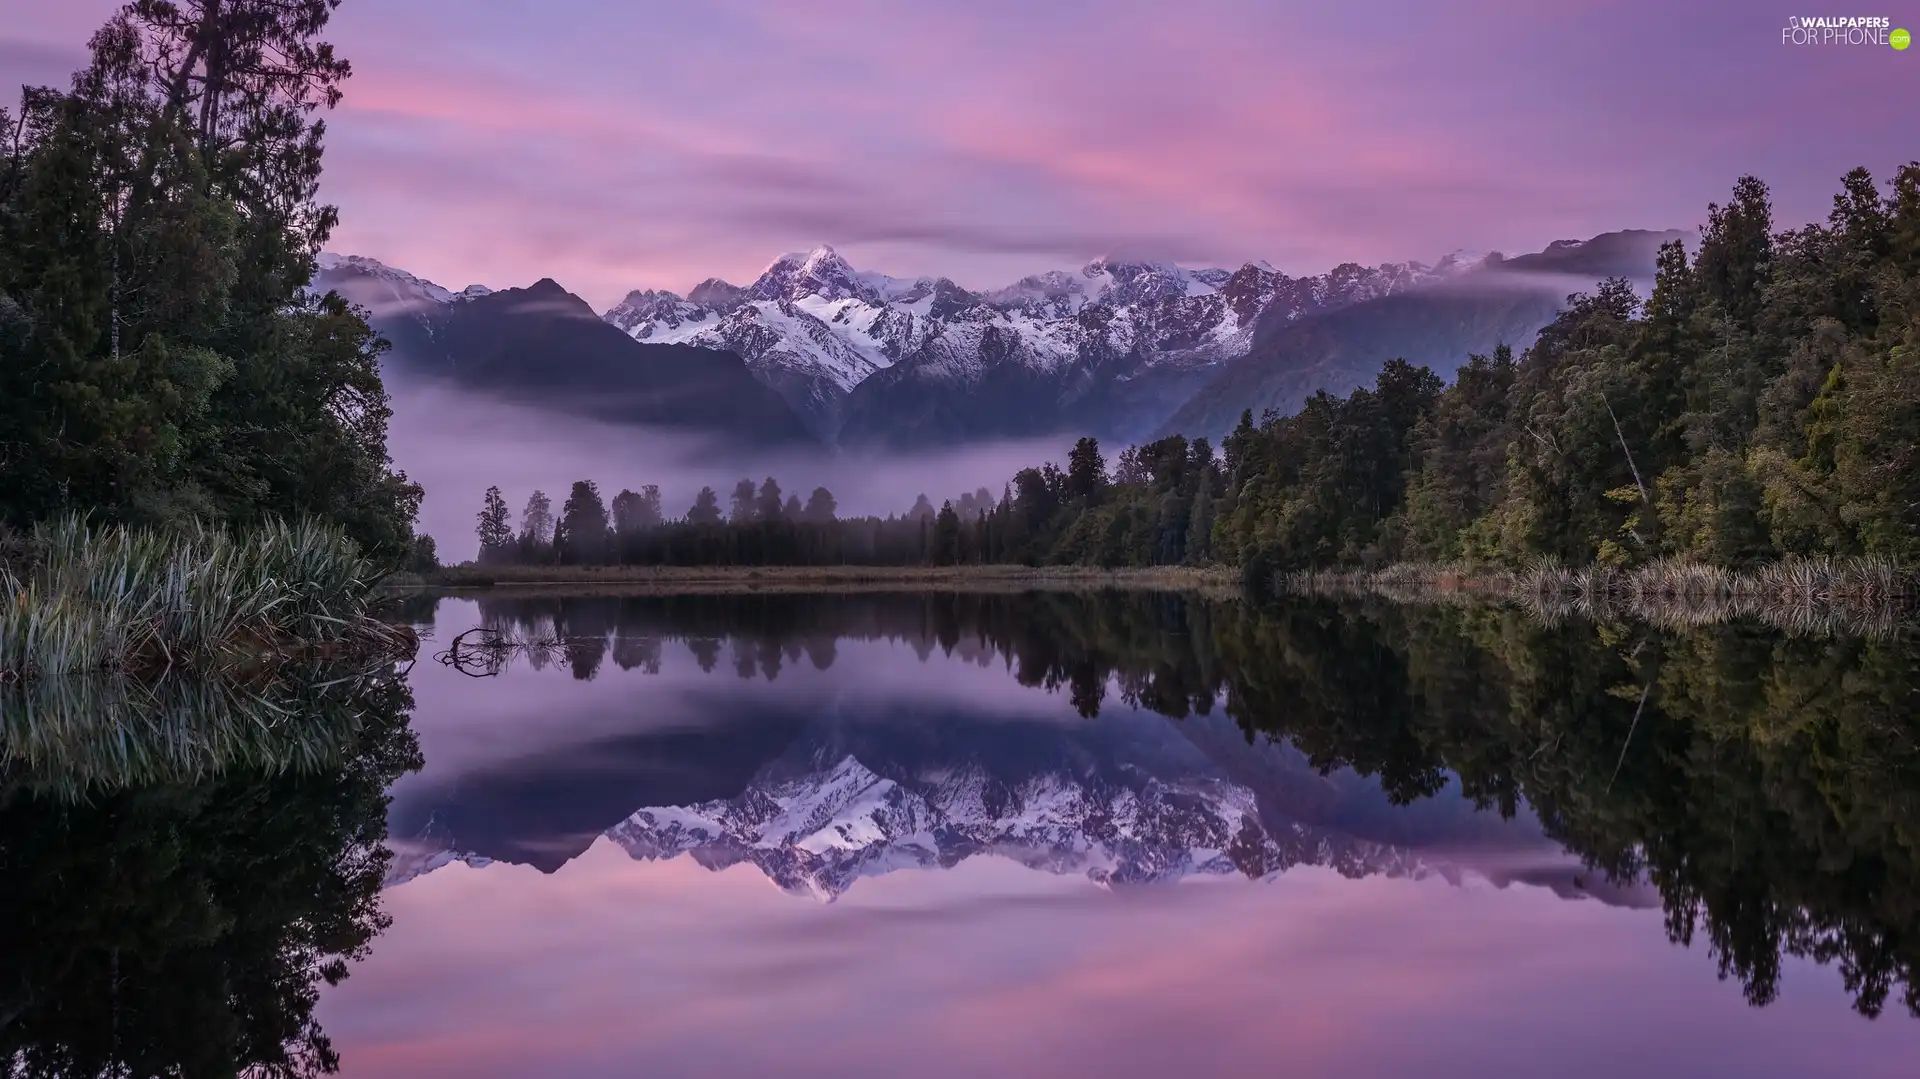 Mountains, Mount Cook National Park, reflection, trees, Mount Cook, New Zeland, Fog, Matheson Lake, viewes